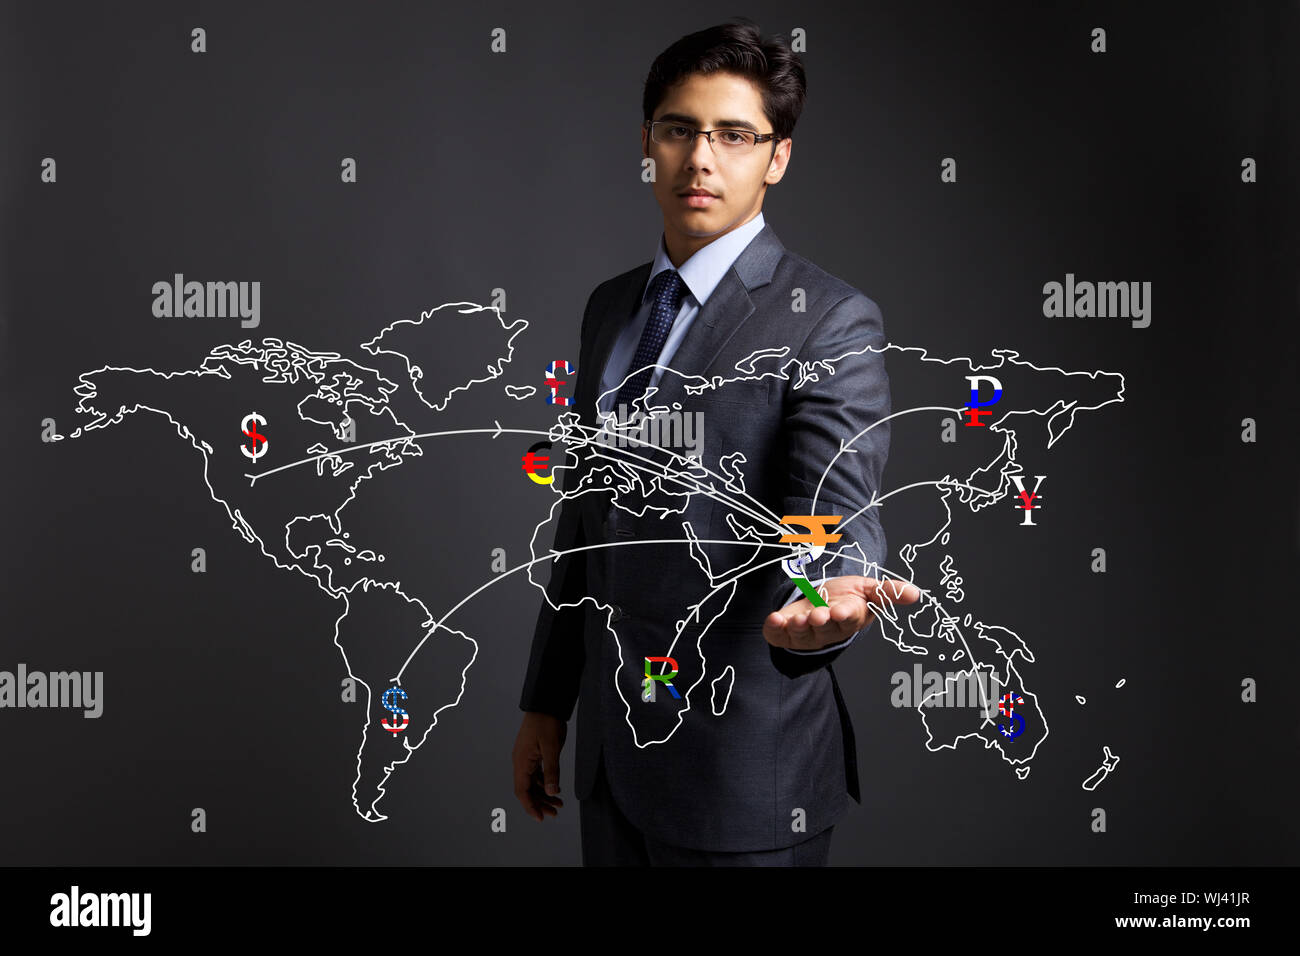 Businessman holding currency symbols on a touch screen representing countries in a world map Stock Photo